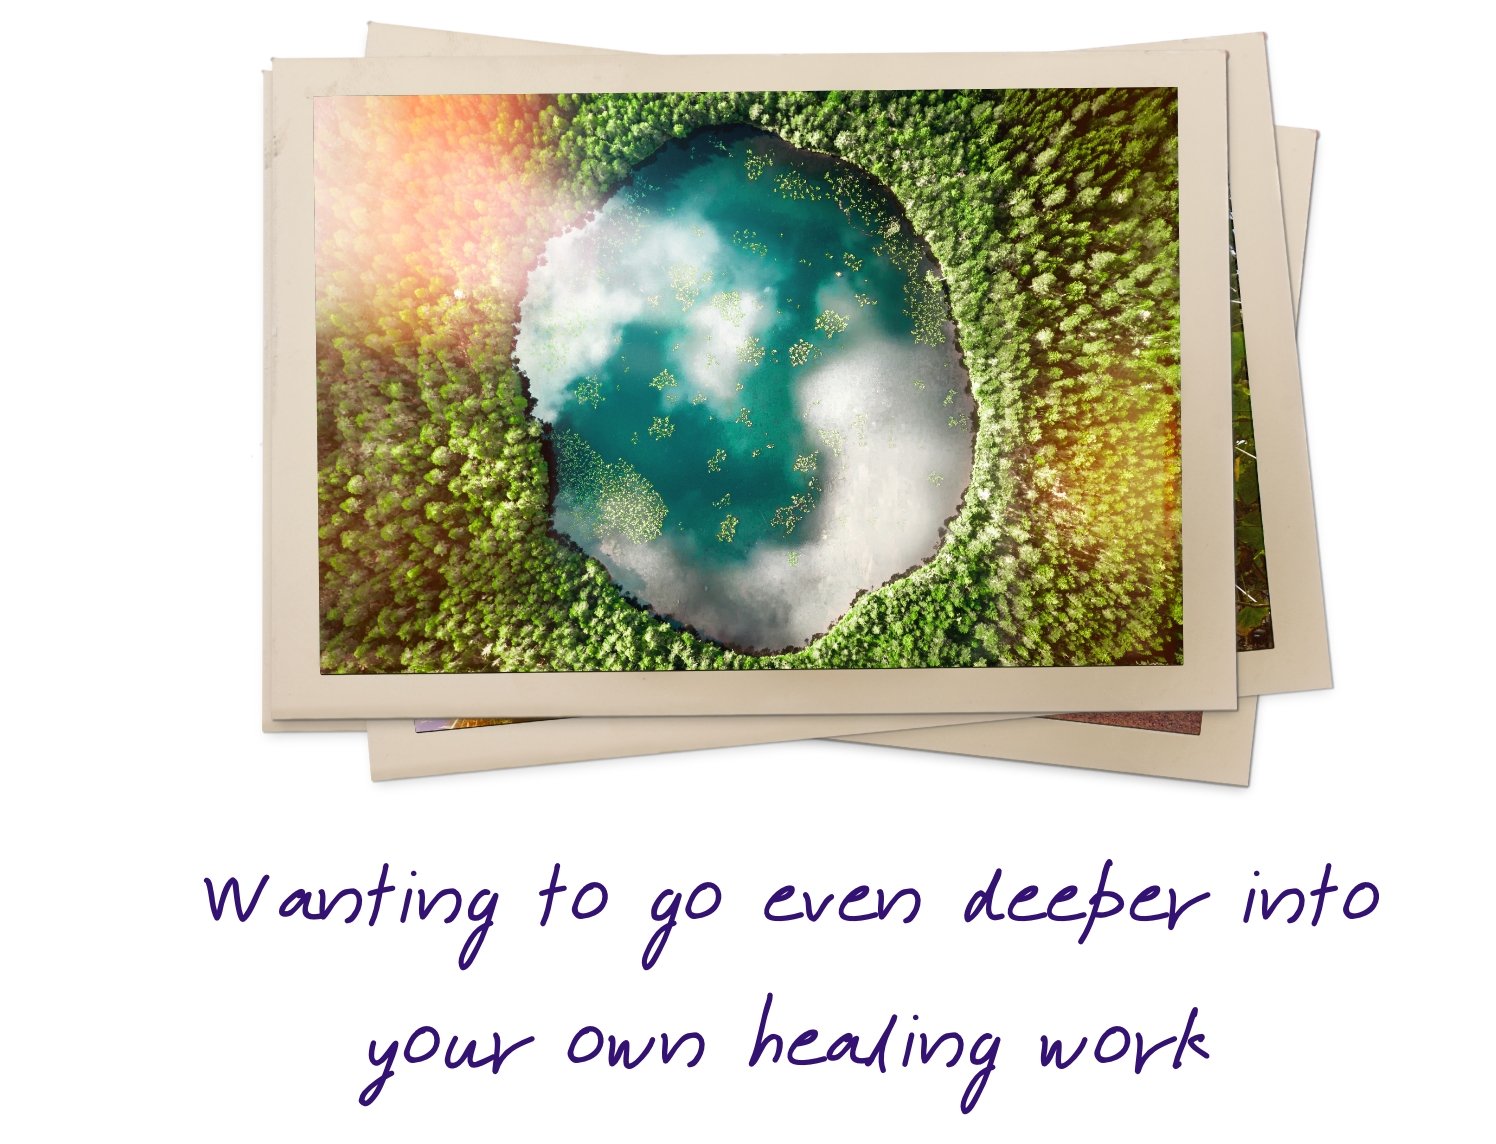 Wanting to go even deeper into your own healing work